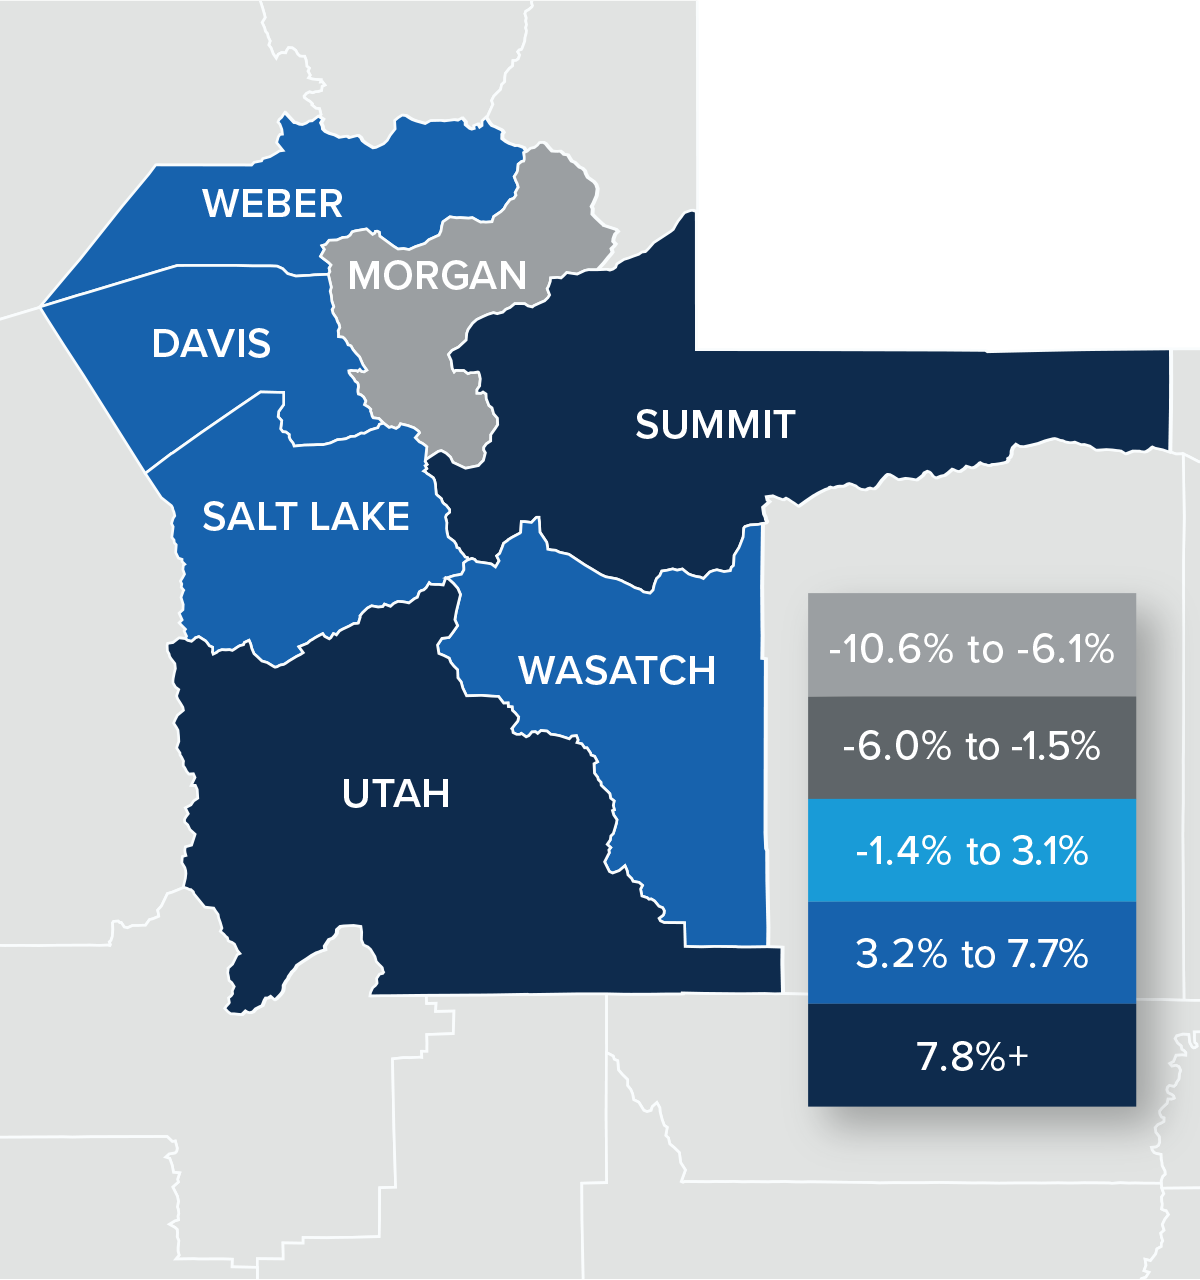 A map showing the real estate home prices percentage changes for various counties in Utah. Different colors correspond to different tiers of percentage change. Morgan County is in the -10.6% to -6.1% range. Weber, Davis, Salt Lake, and Wasatch County have a percentage change in the 3.2% to 7.7% range, and Utah and Summit are in the 7.8%+ range.